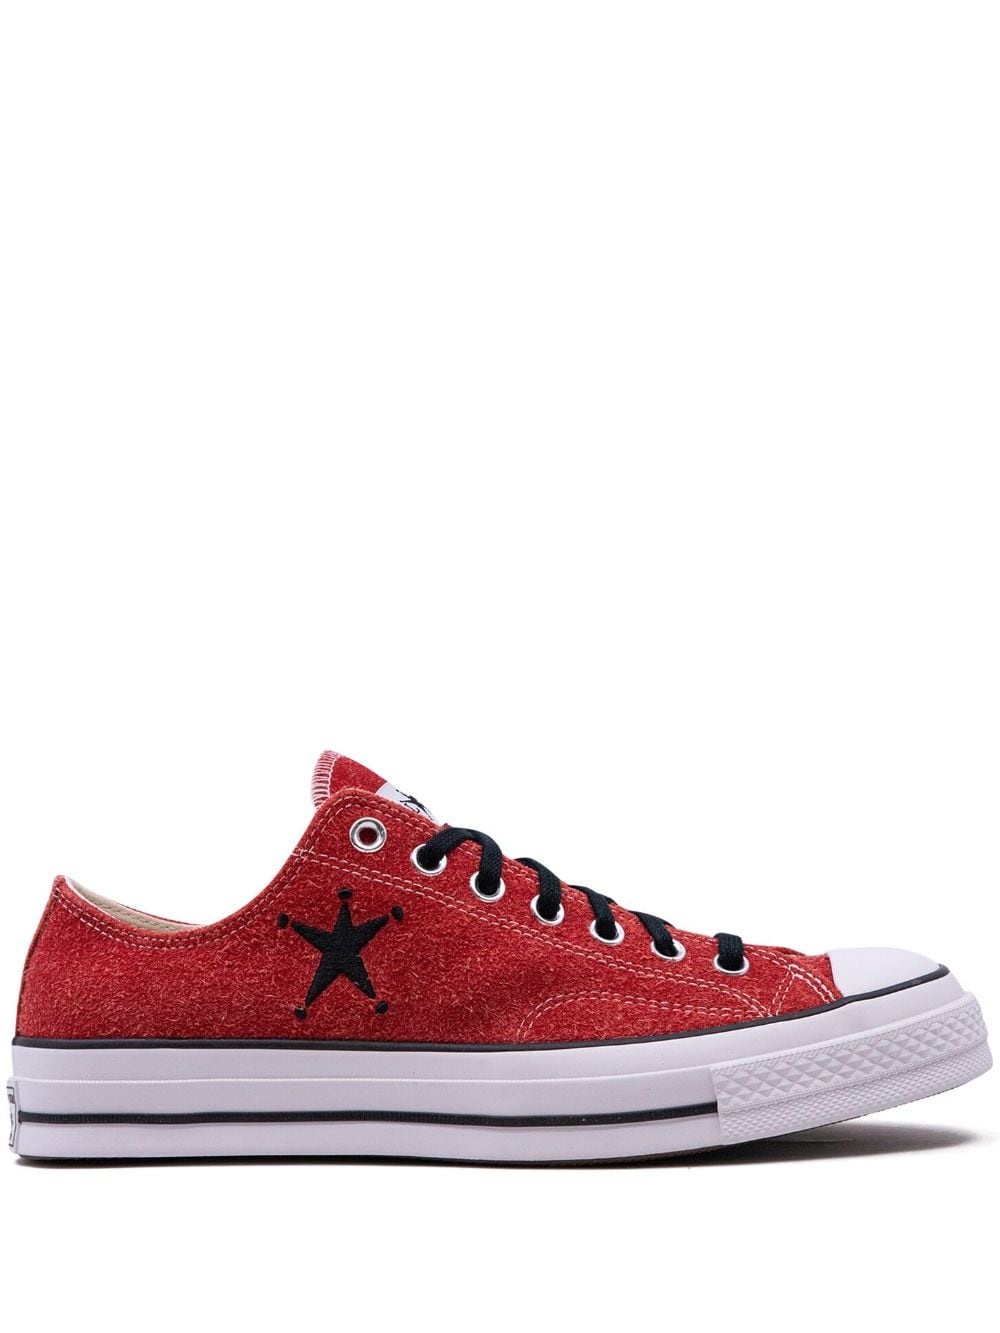 x Stussy Chuck 70 "Poppy Red" sneakers - 1